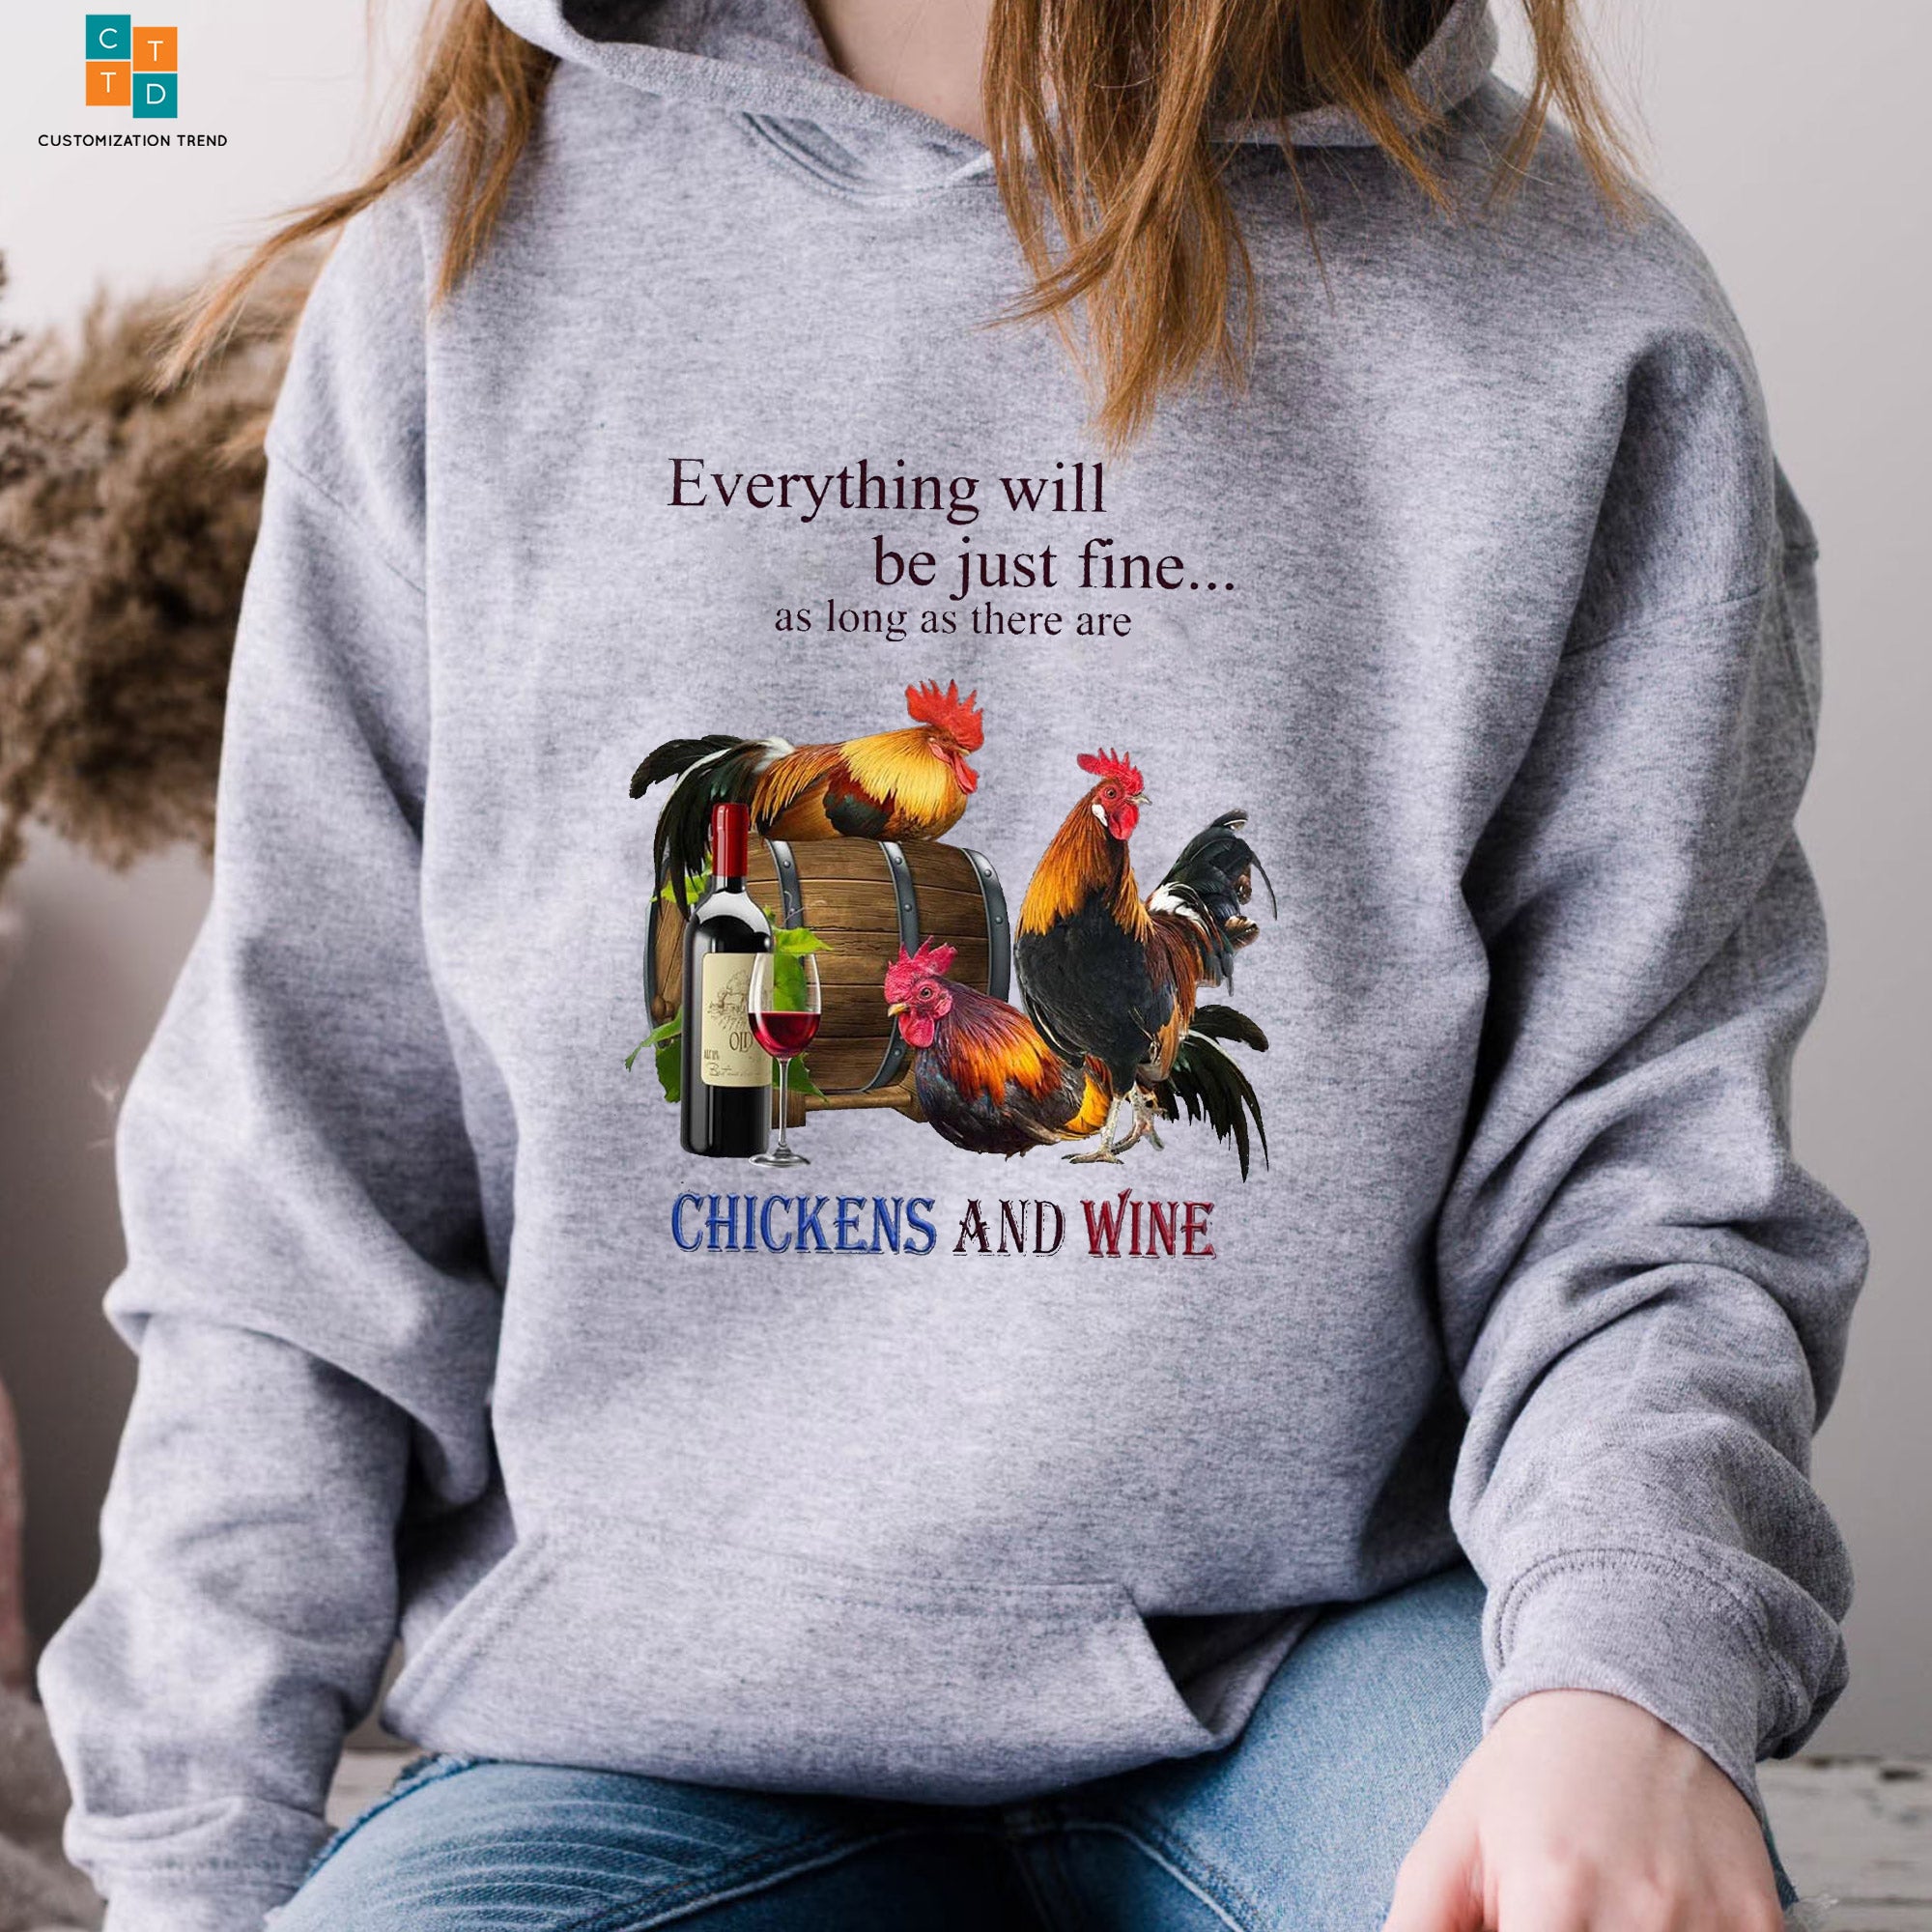 Every Little Thing Is Gonna Be Alright Hoodie , Shirt